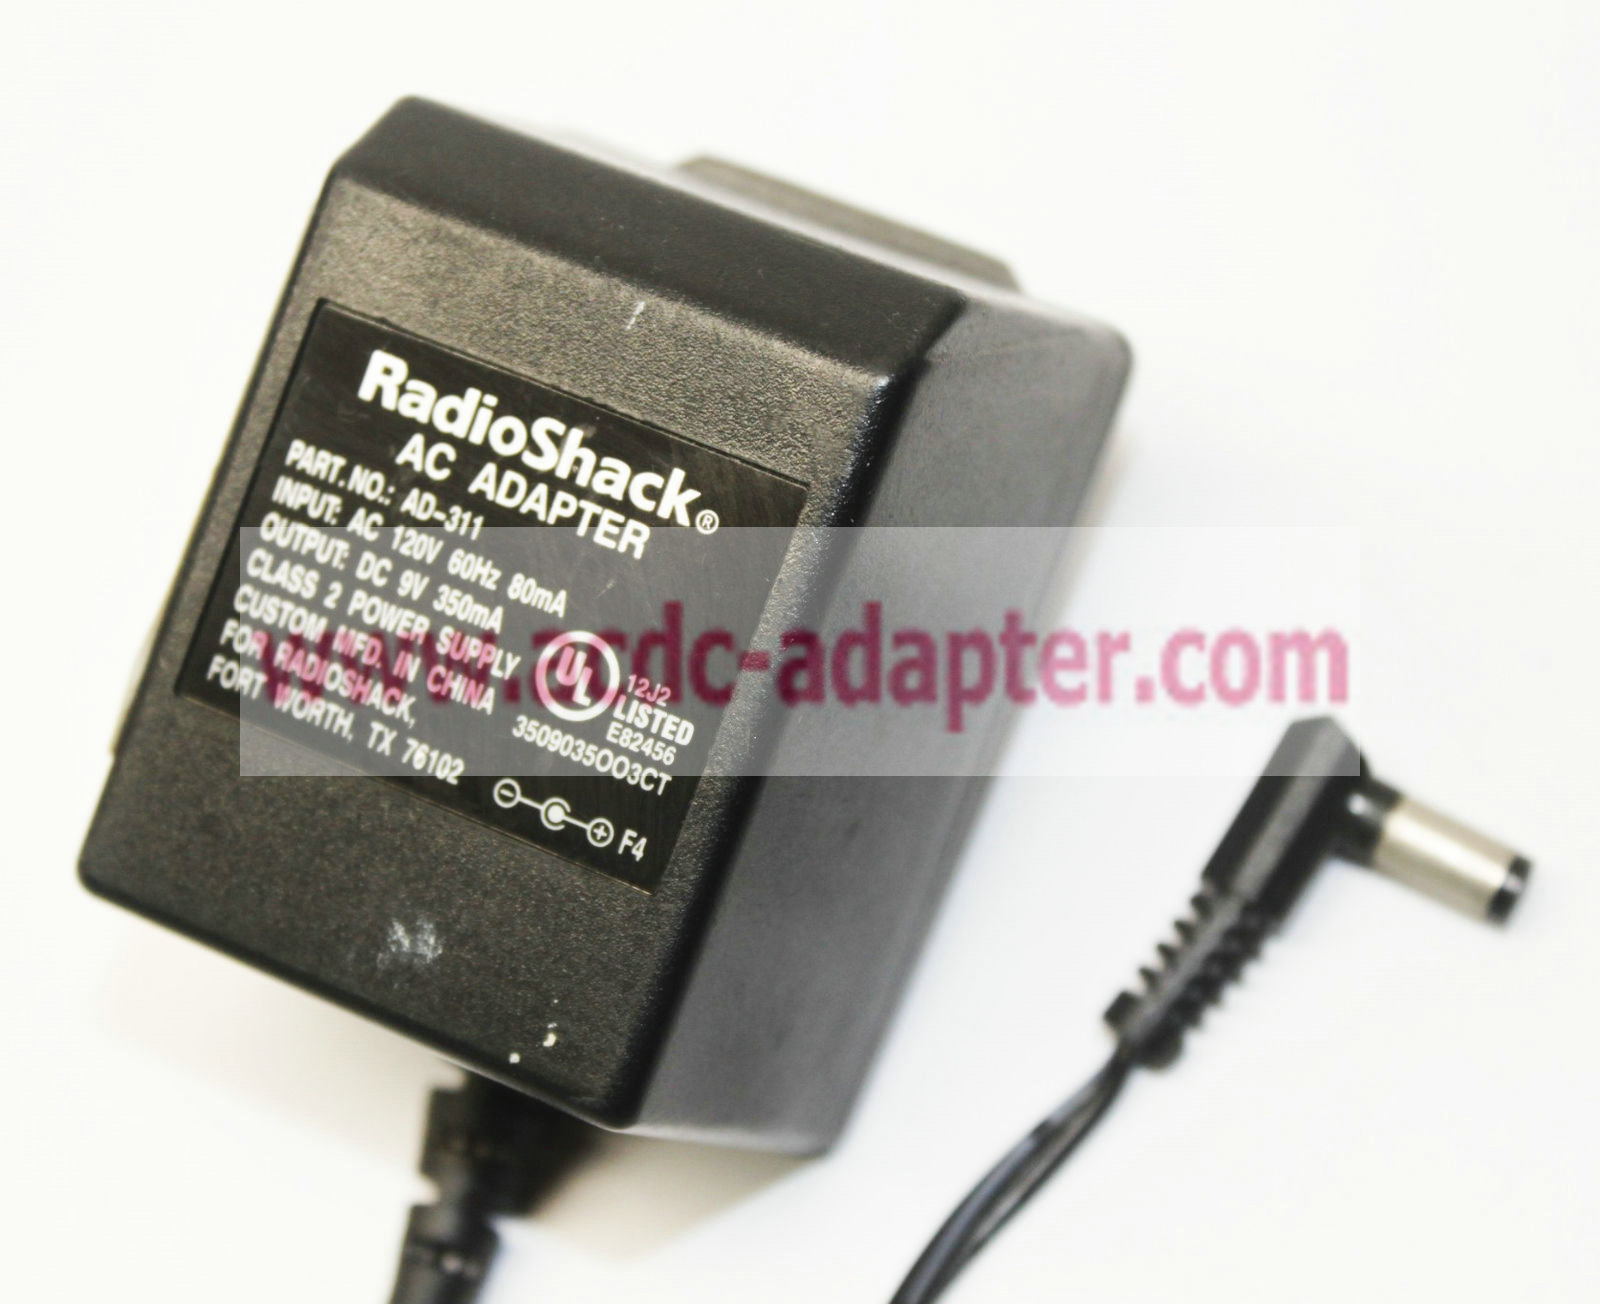 NEW Radio Shack DC 9V 350mA AC Adapter AD-311 Class 2 Power Supply Charger